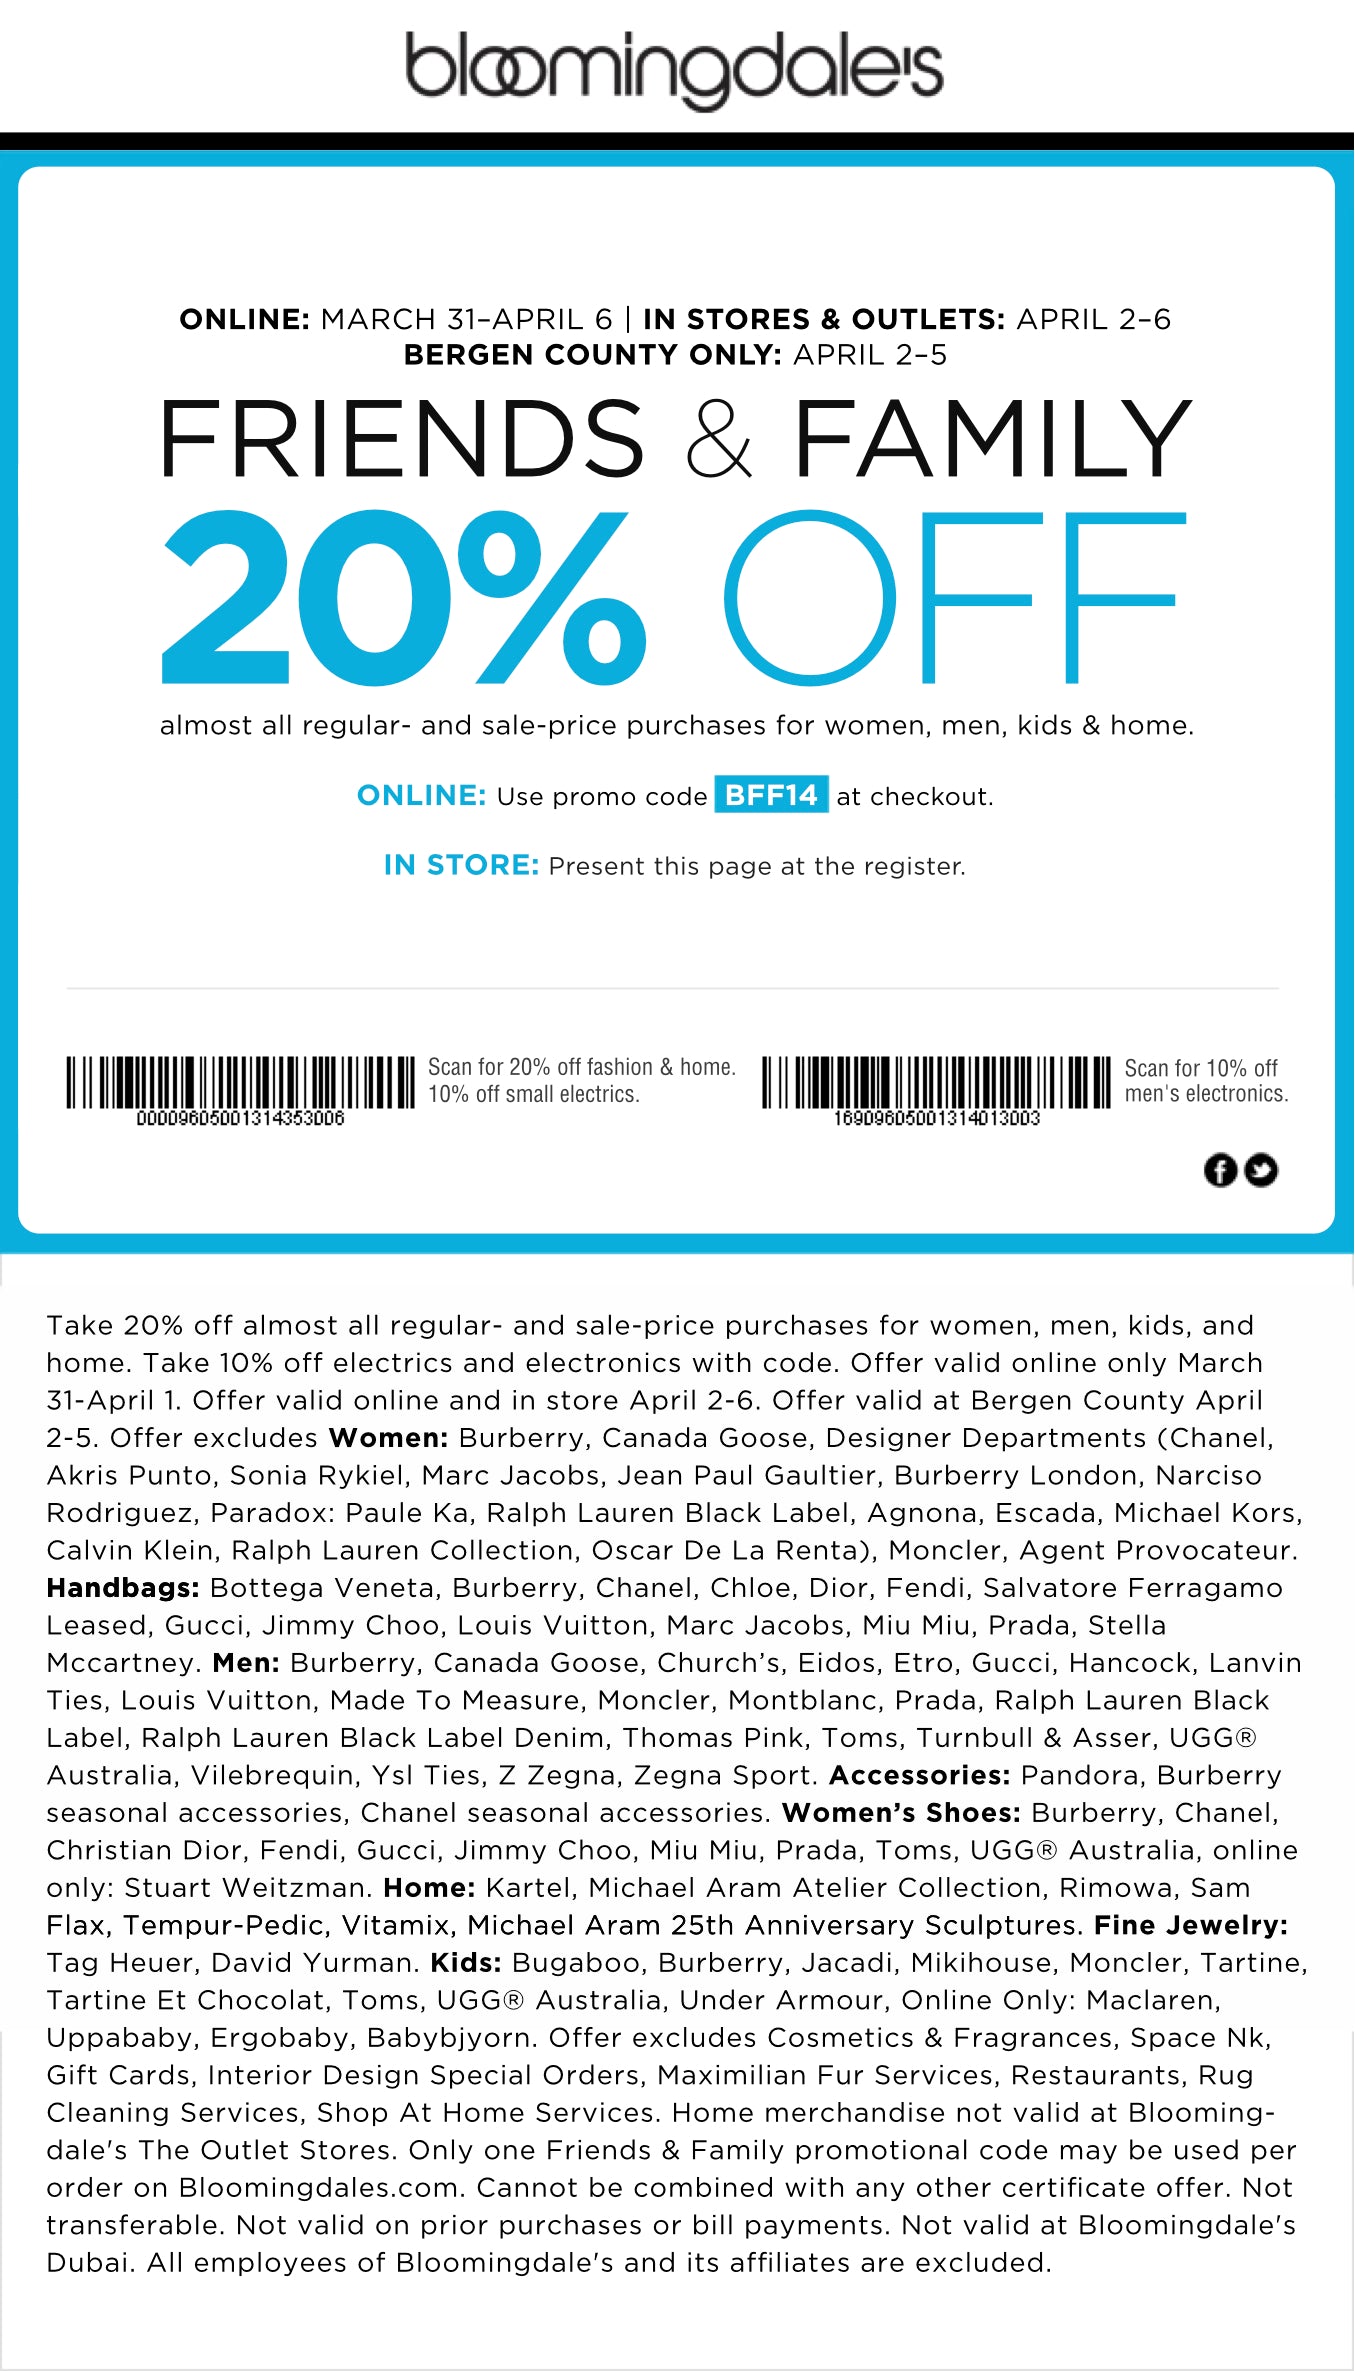 Bloomingdale's Friends & Family 20% Off Discount Coupon Promo Code: March/April 2014